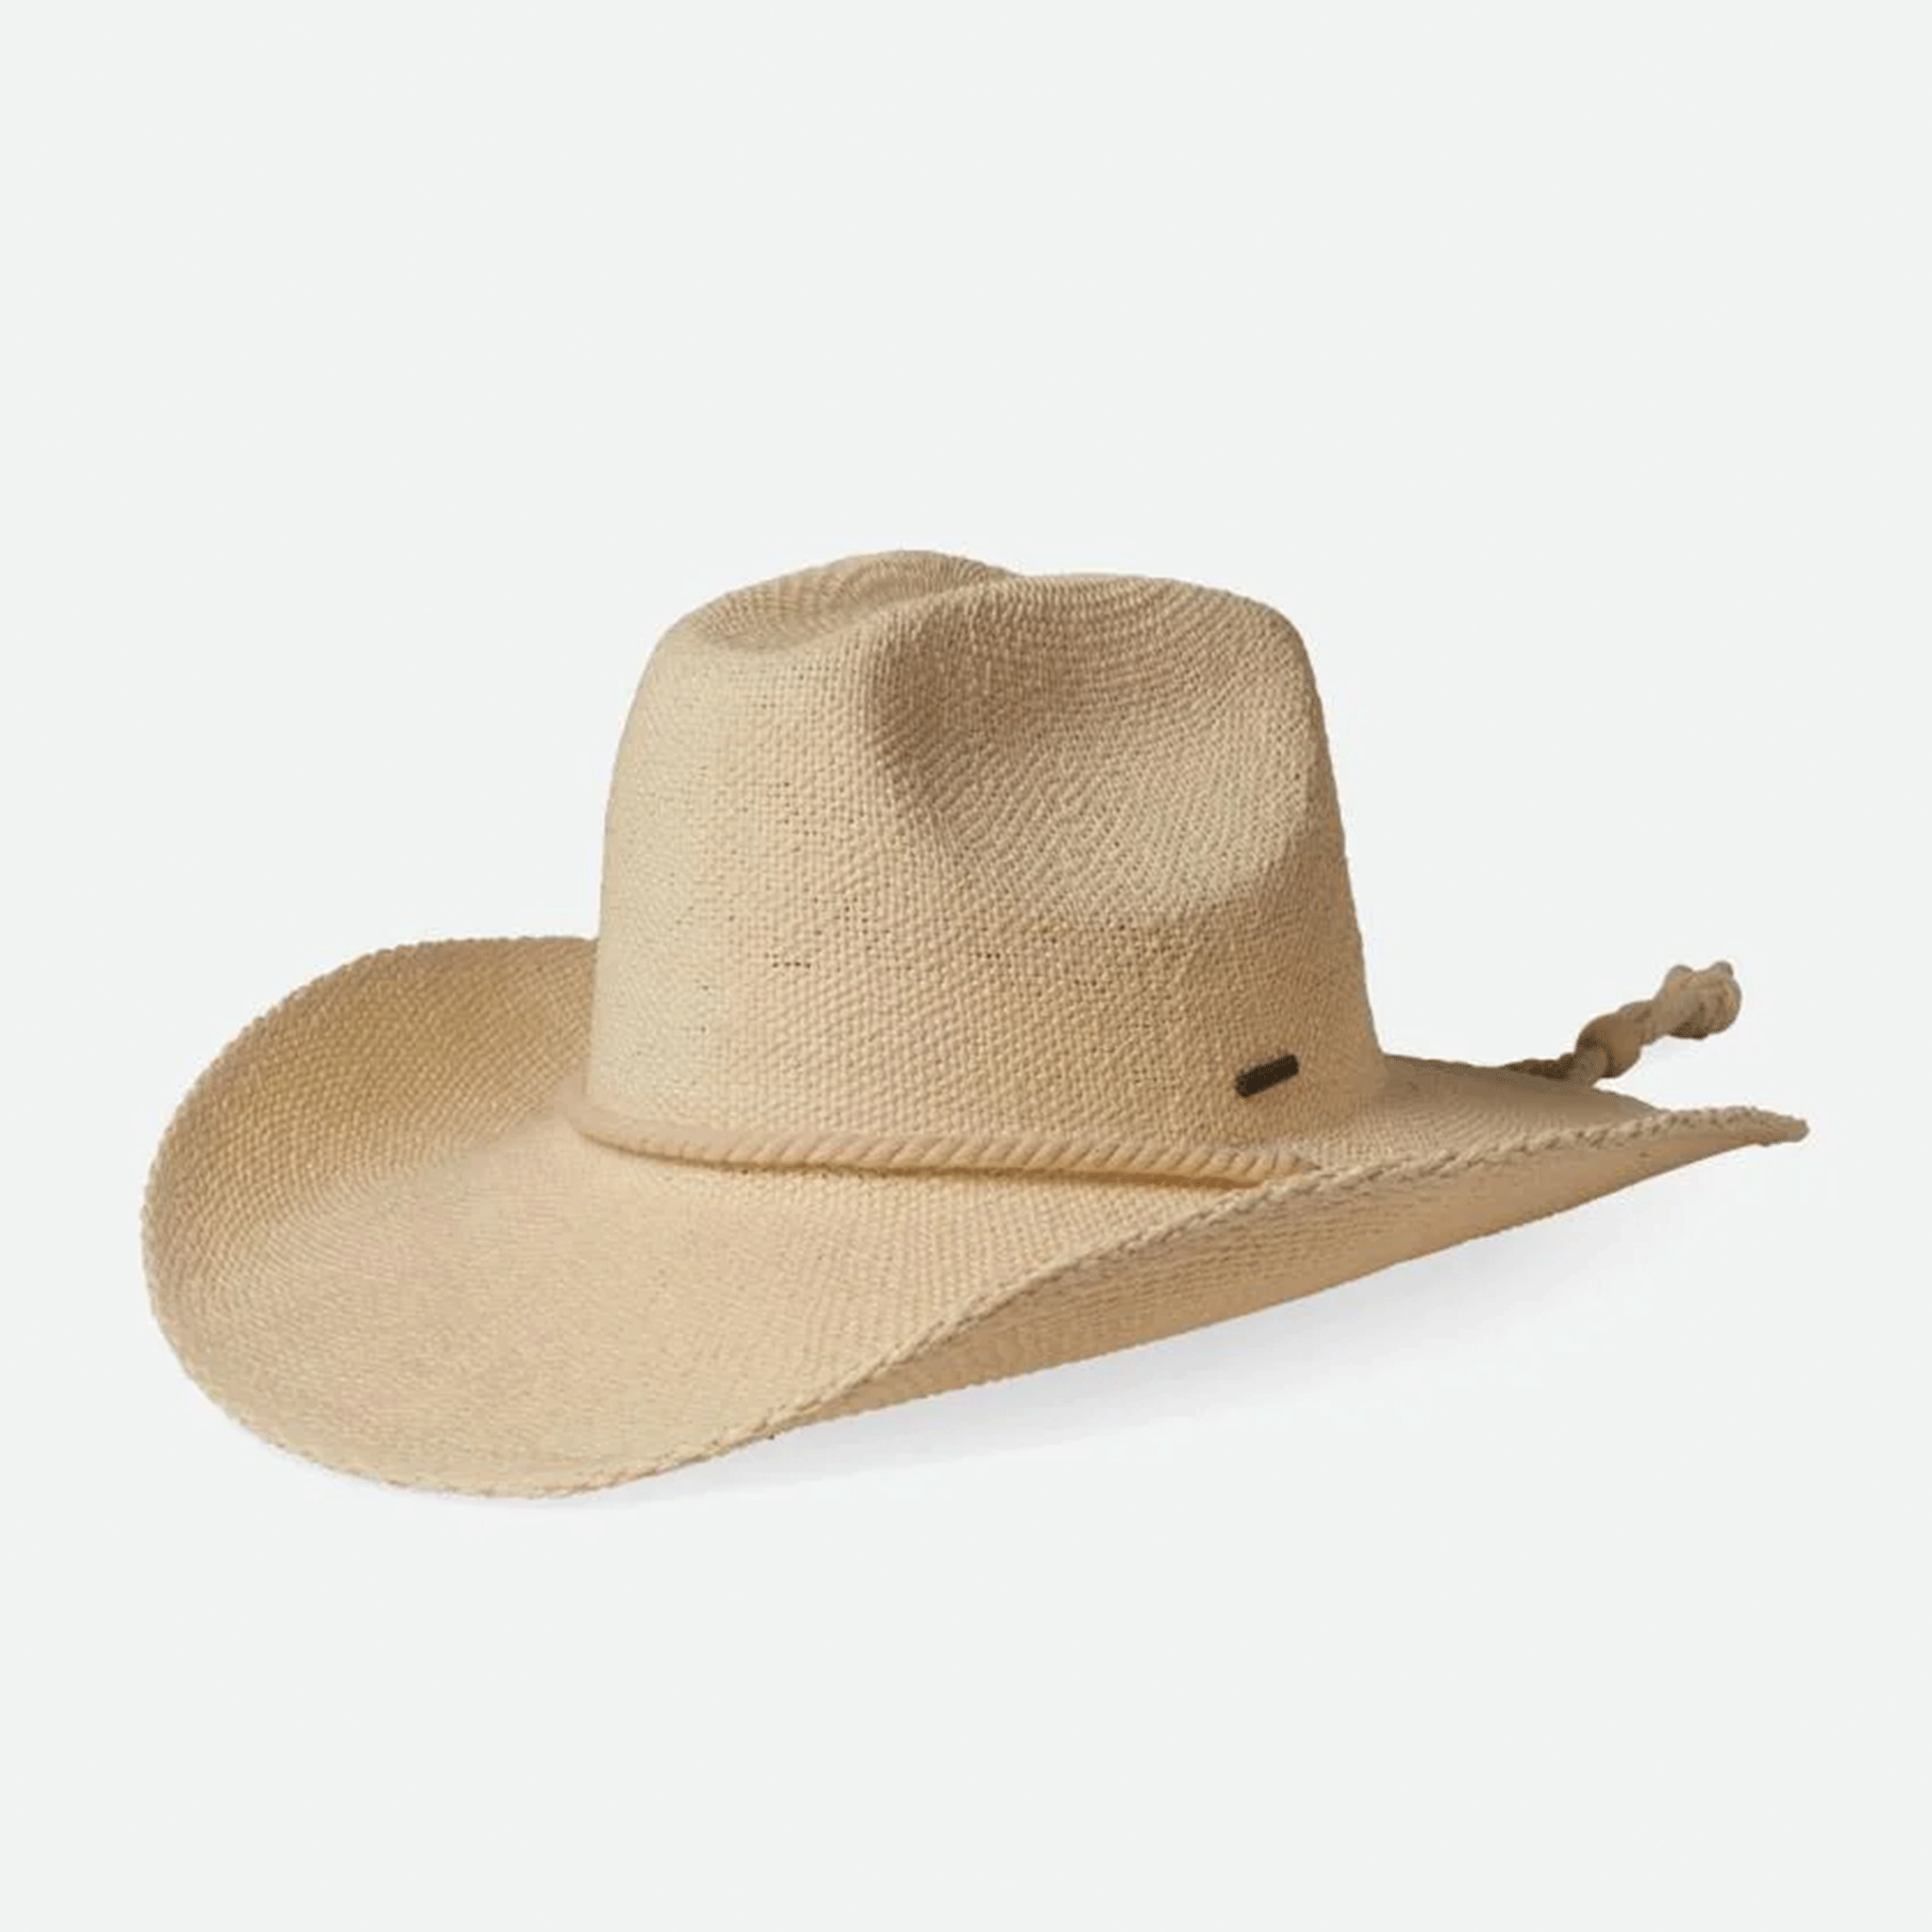 A bone colored straw cowboy style hat with a rope neck tie detail.